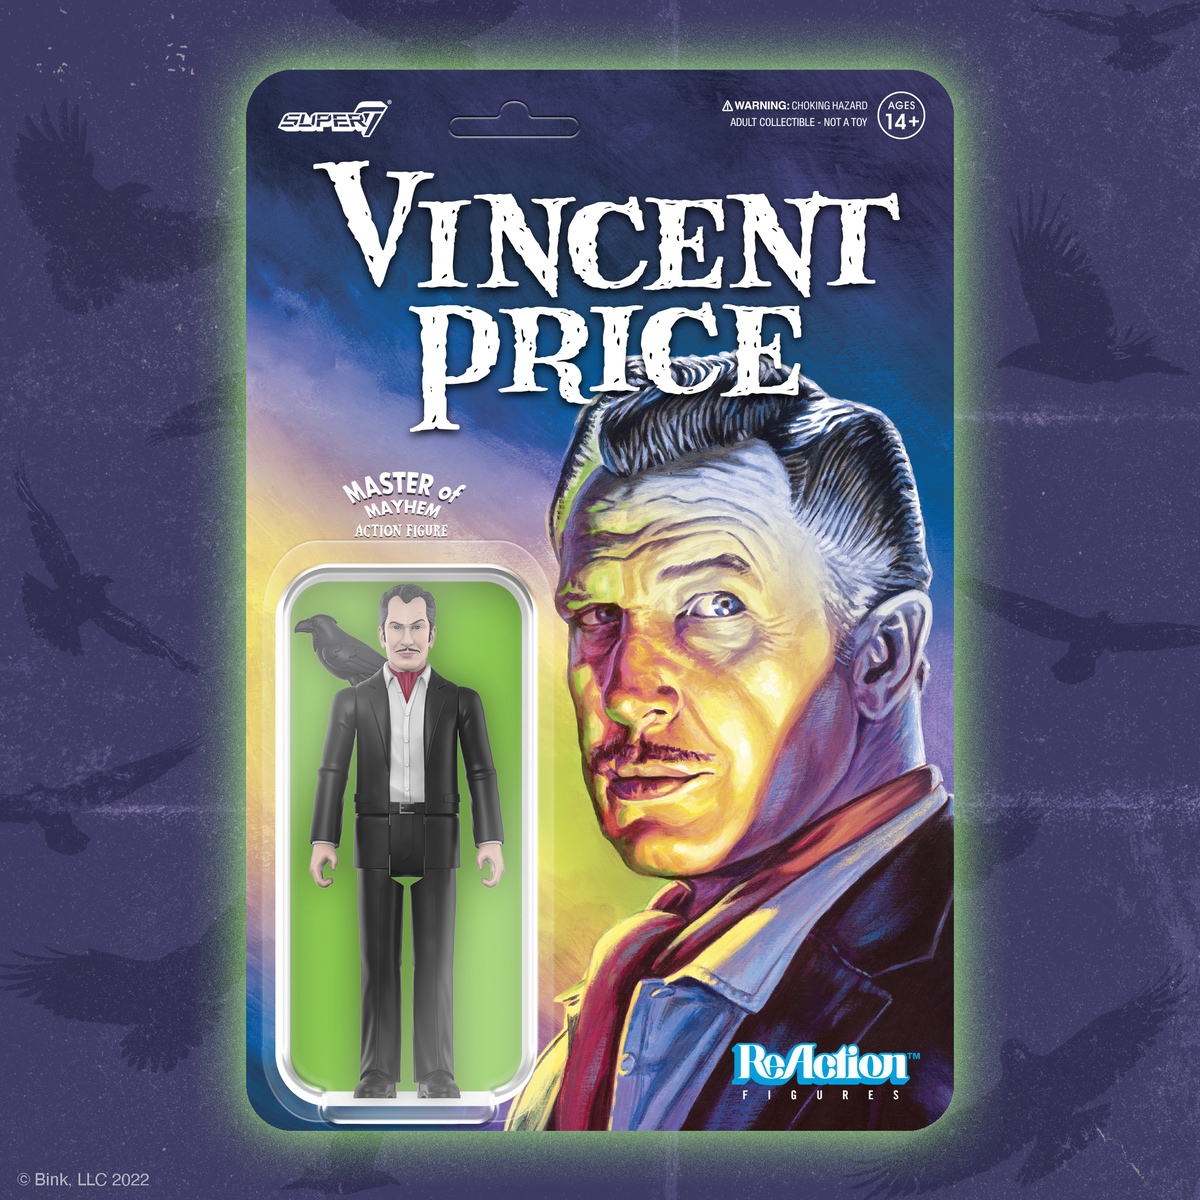 There may not be anyone more synonymous with classic horror than the delightfully devilish Vincent Price! The Vincent Price ReAction Figure is available for pre-sale now on Super7.com!